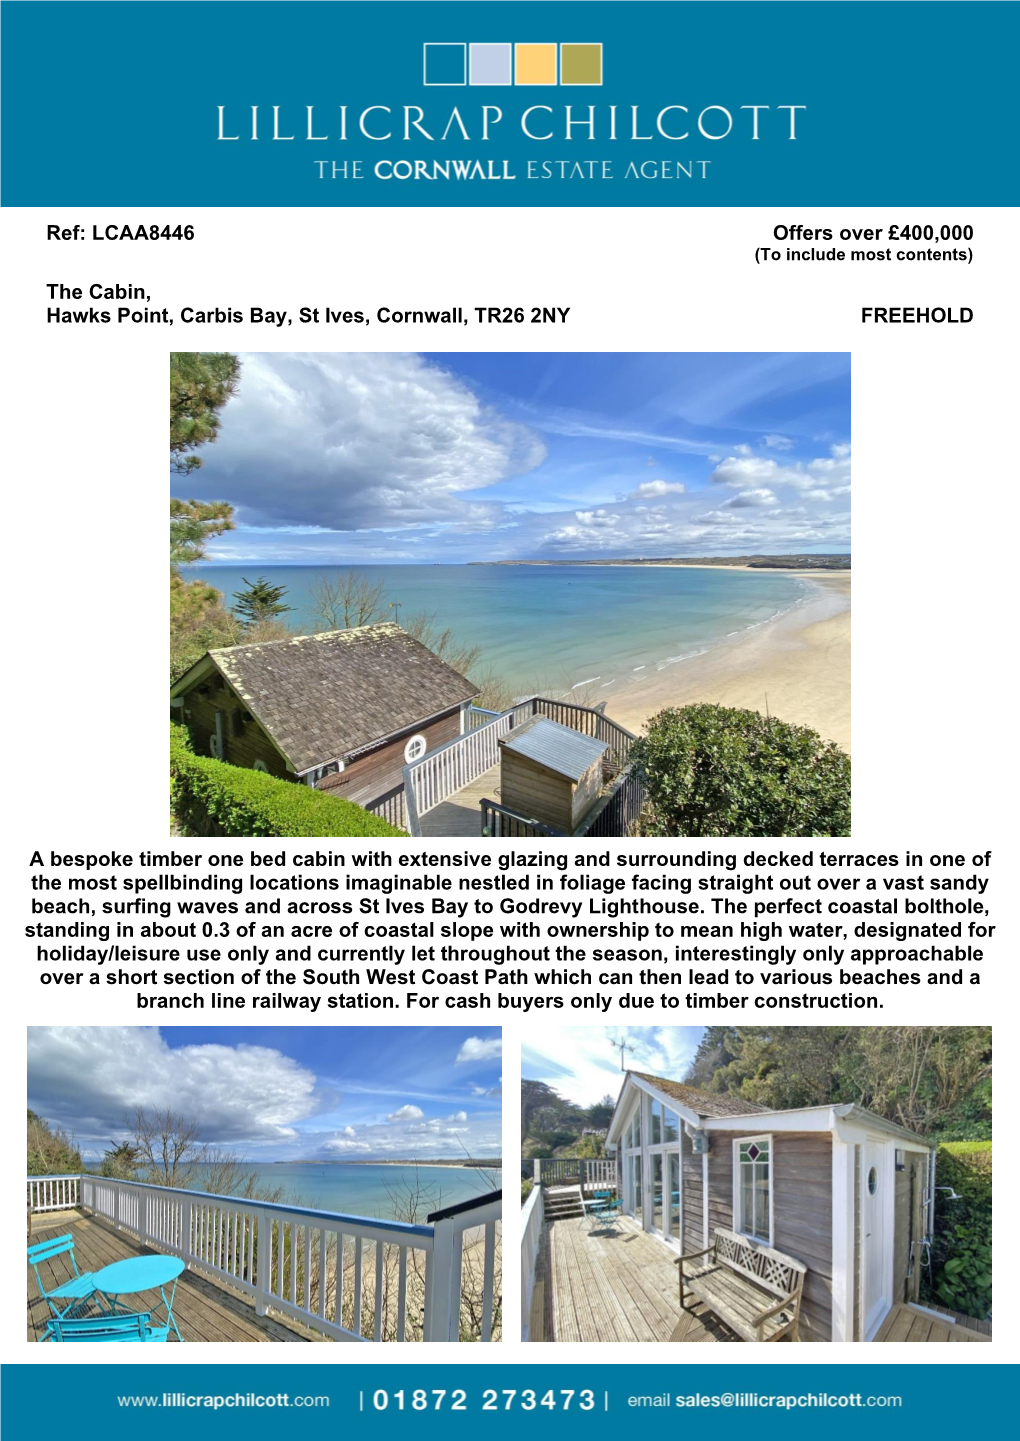 LCAA8446 Offers Over £400000 the Cabin, Hawks Point, Carbis Bay, St